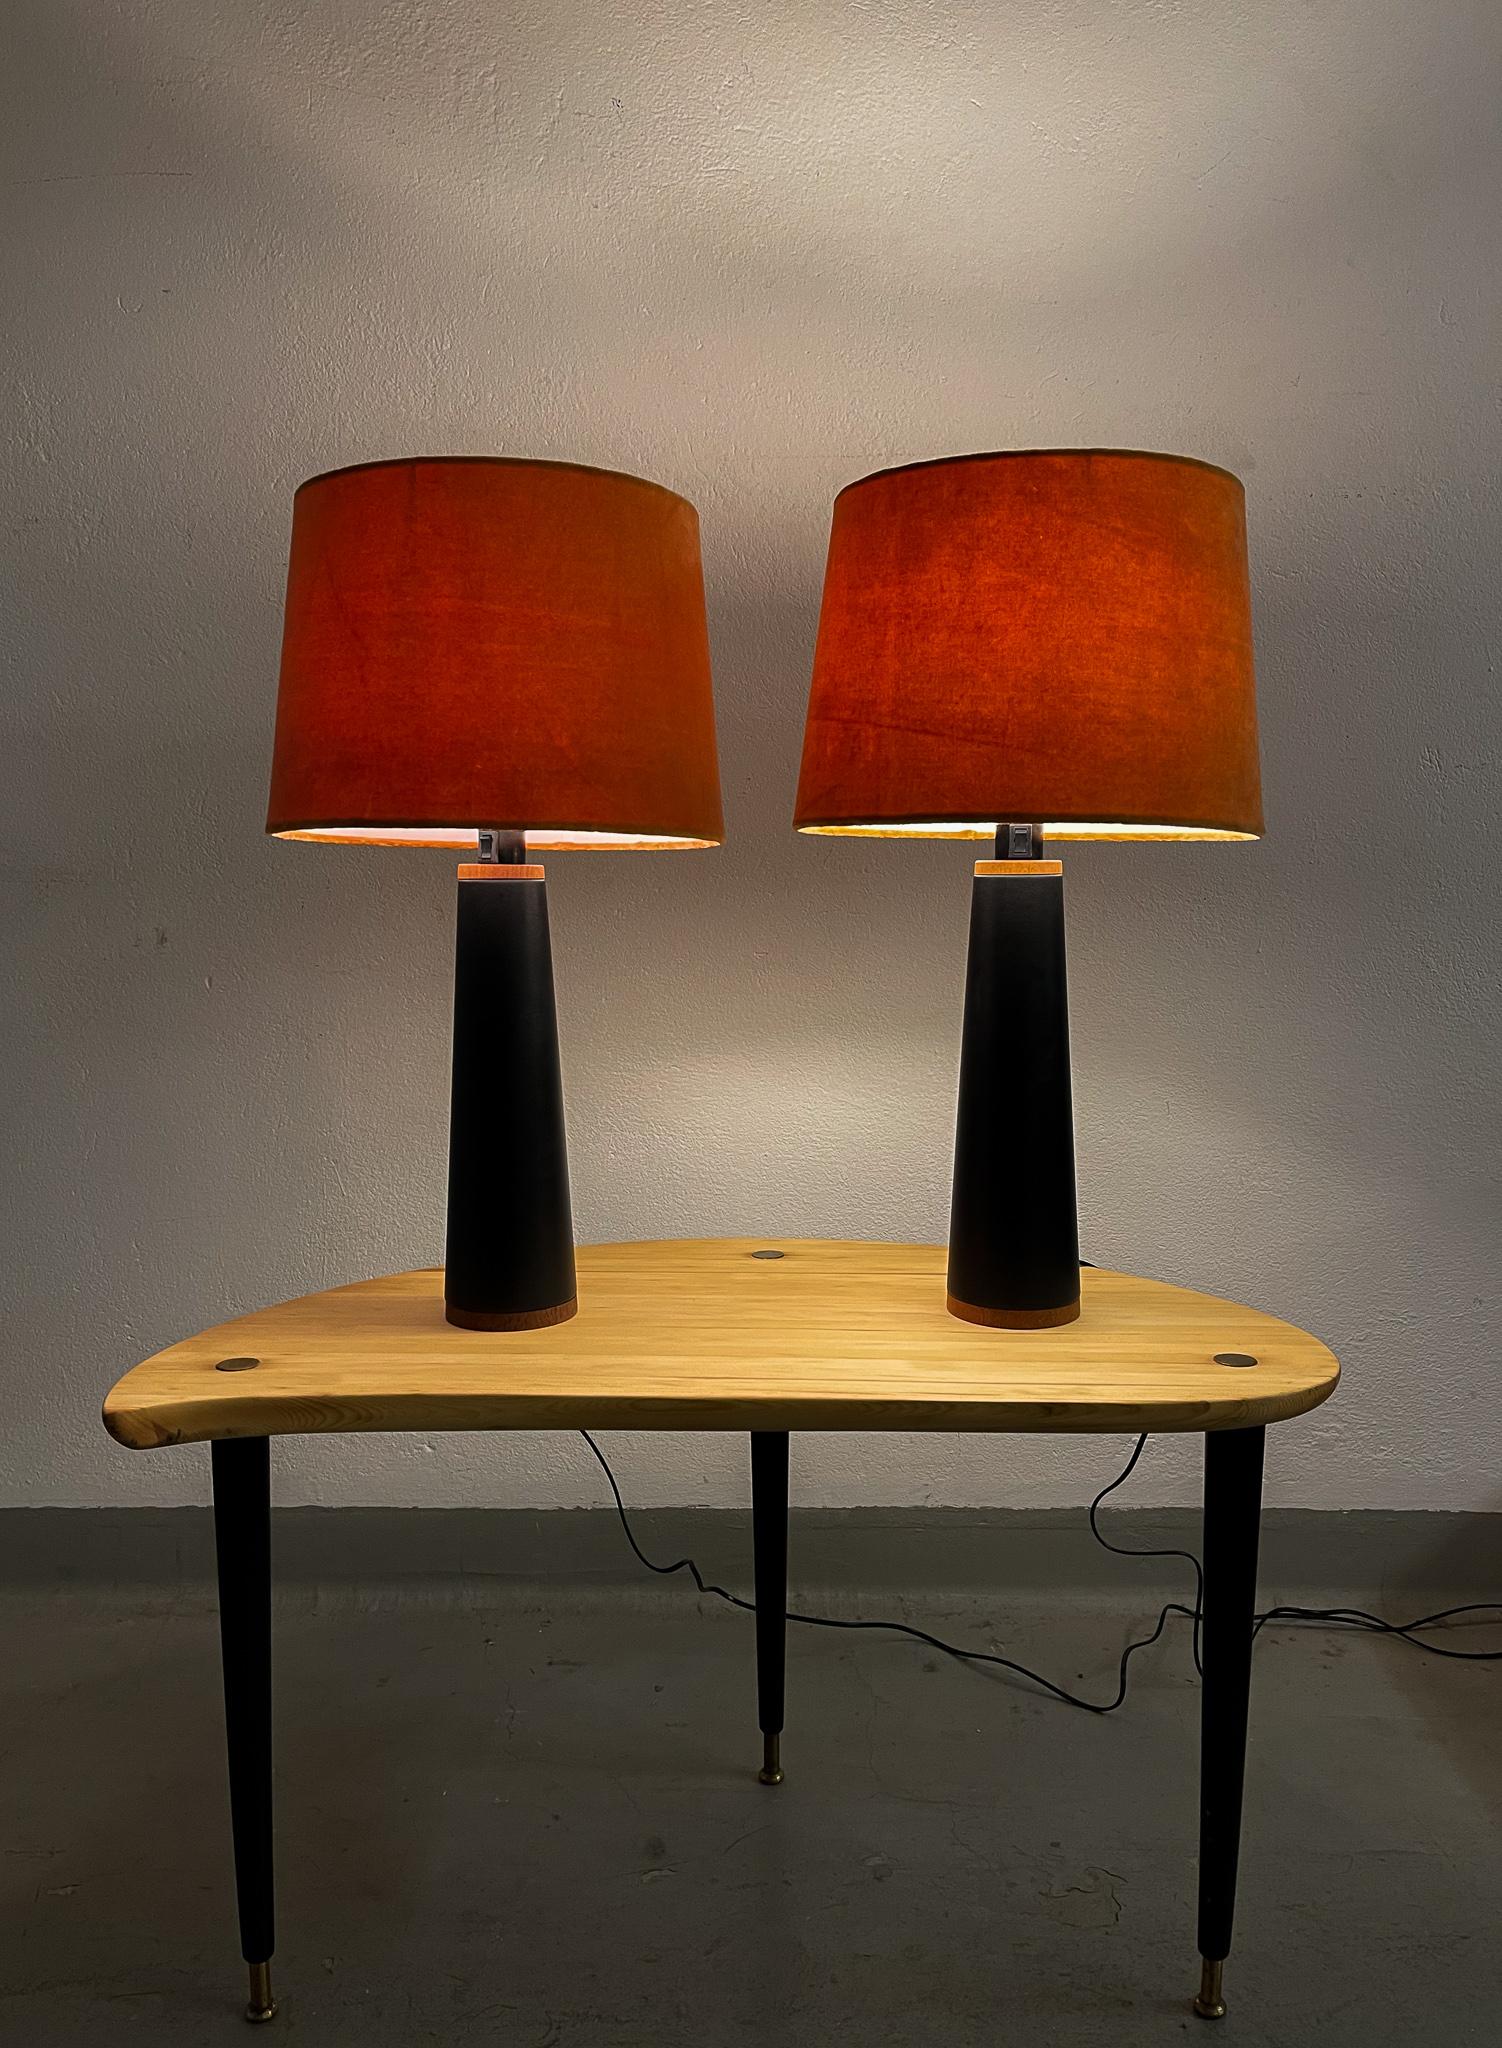 Pair of table lamps manufactured in Sweden and produced by famous Luxus. They are made in black synthetic leather with stiches around a teak base. 

All new quality shades produced in Sweden.

Nice vintage condition. Rewired

Dimensions: Height